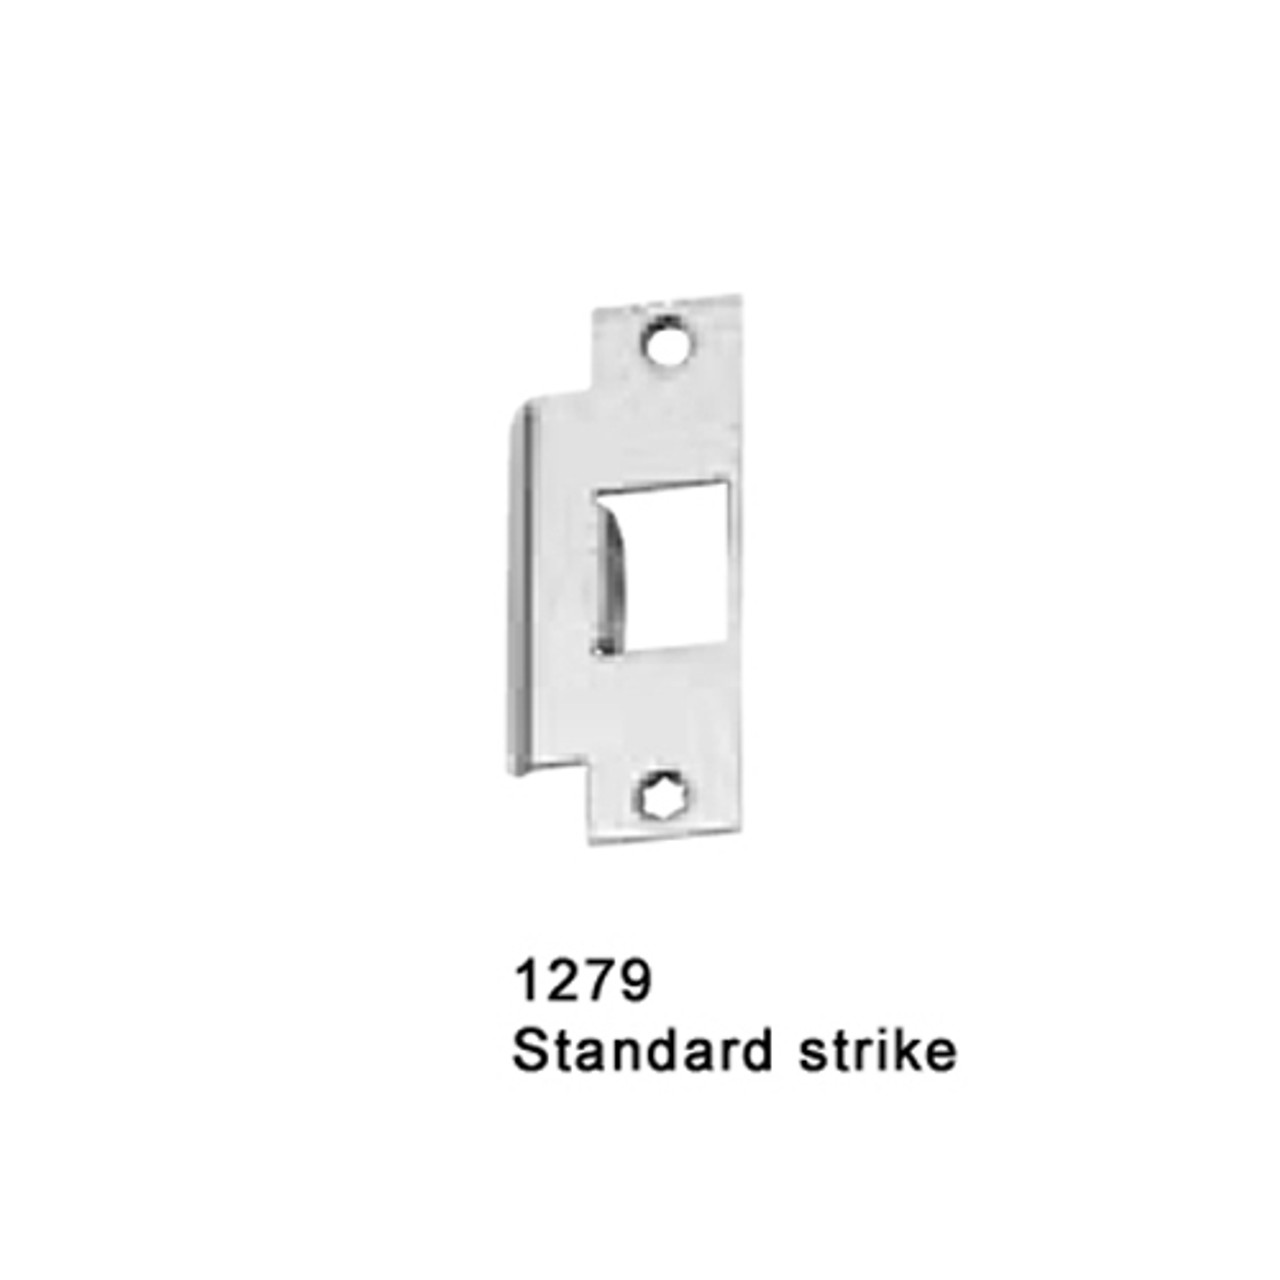 CD25-M-TP-US4-3-LHR Falcon 25 Series Mortise Lock Devices with 512TP Thumbpiece Trim in Satin Brass